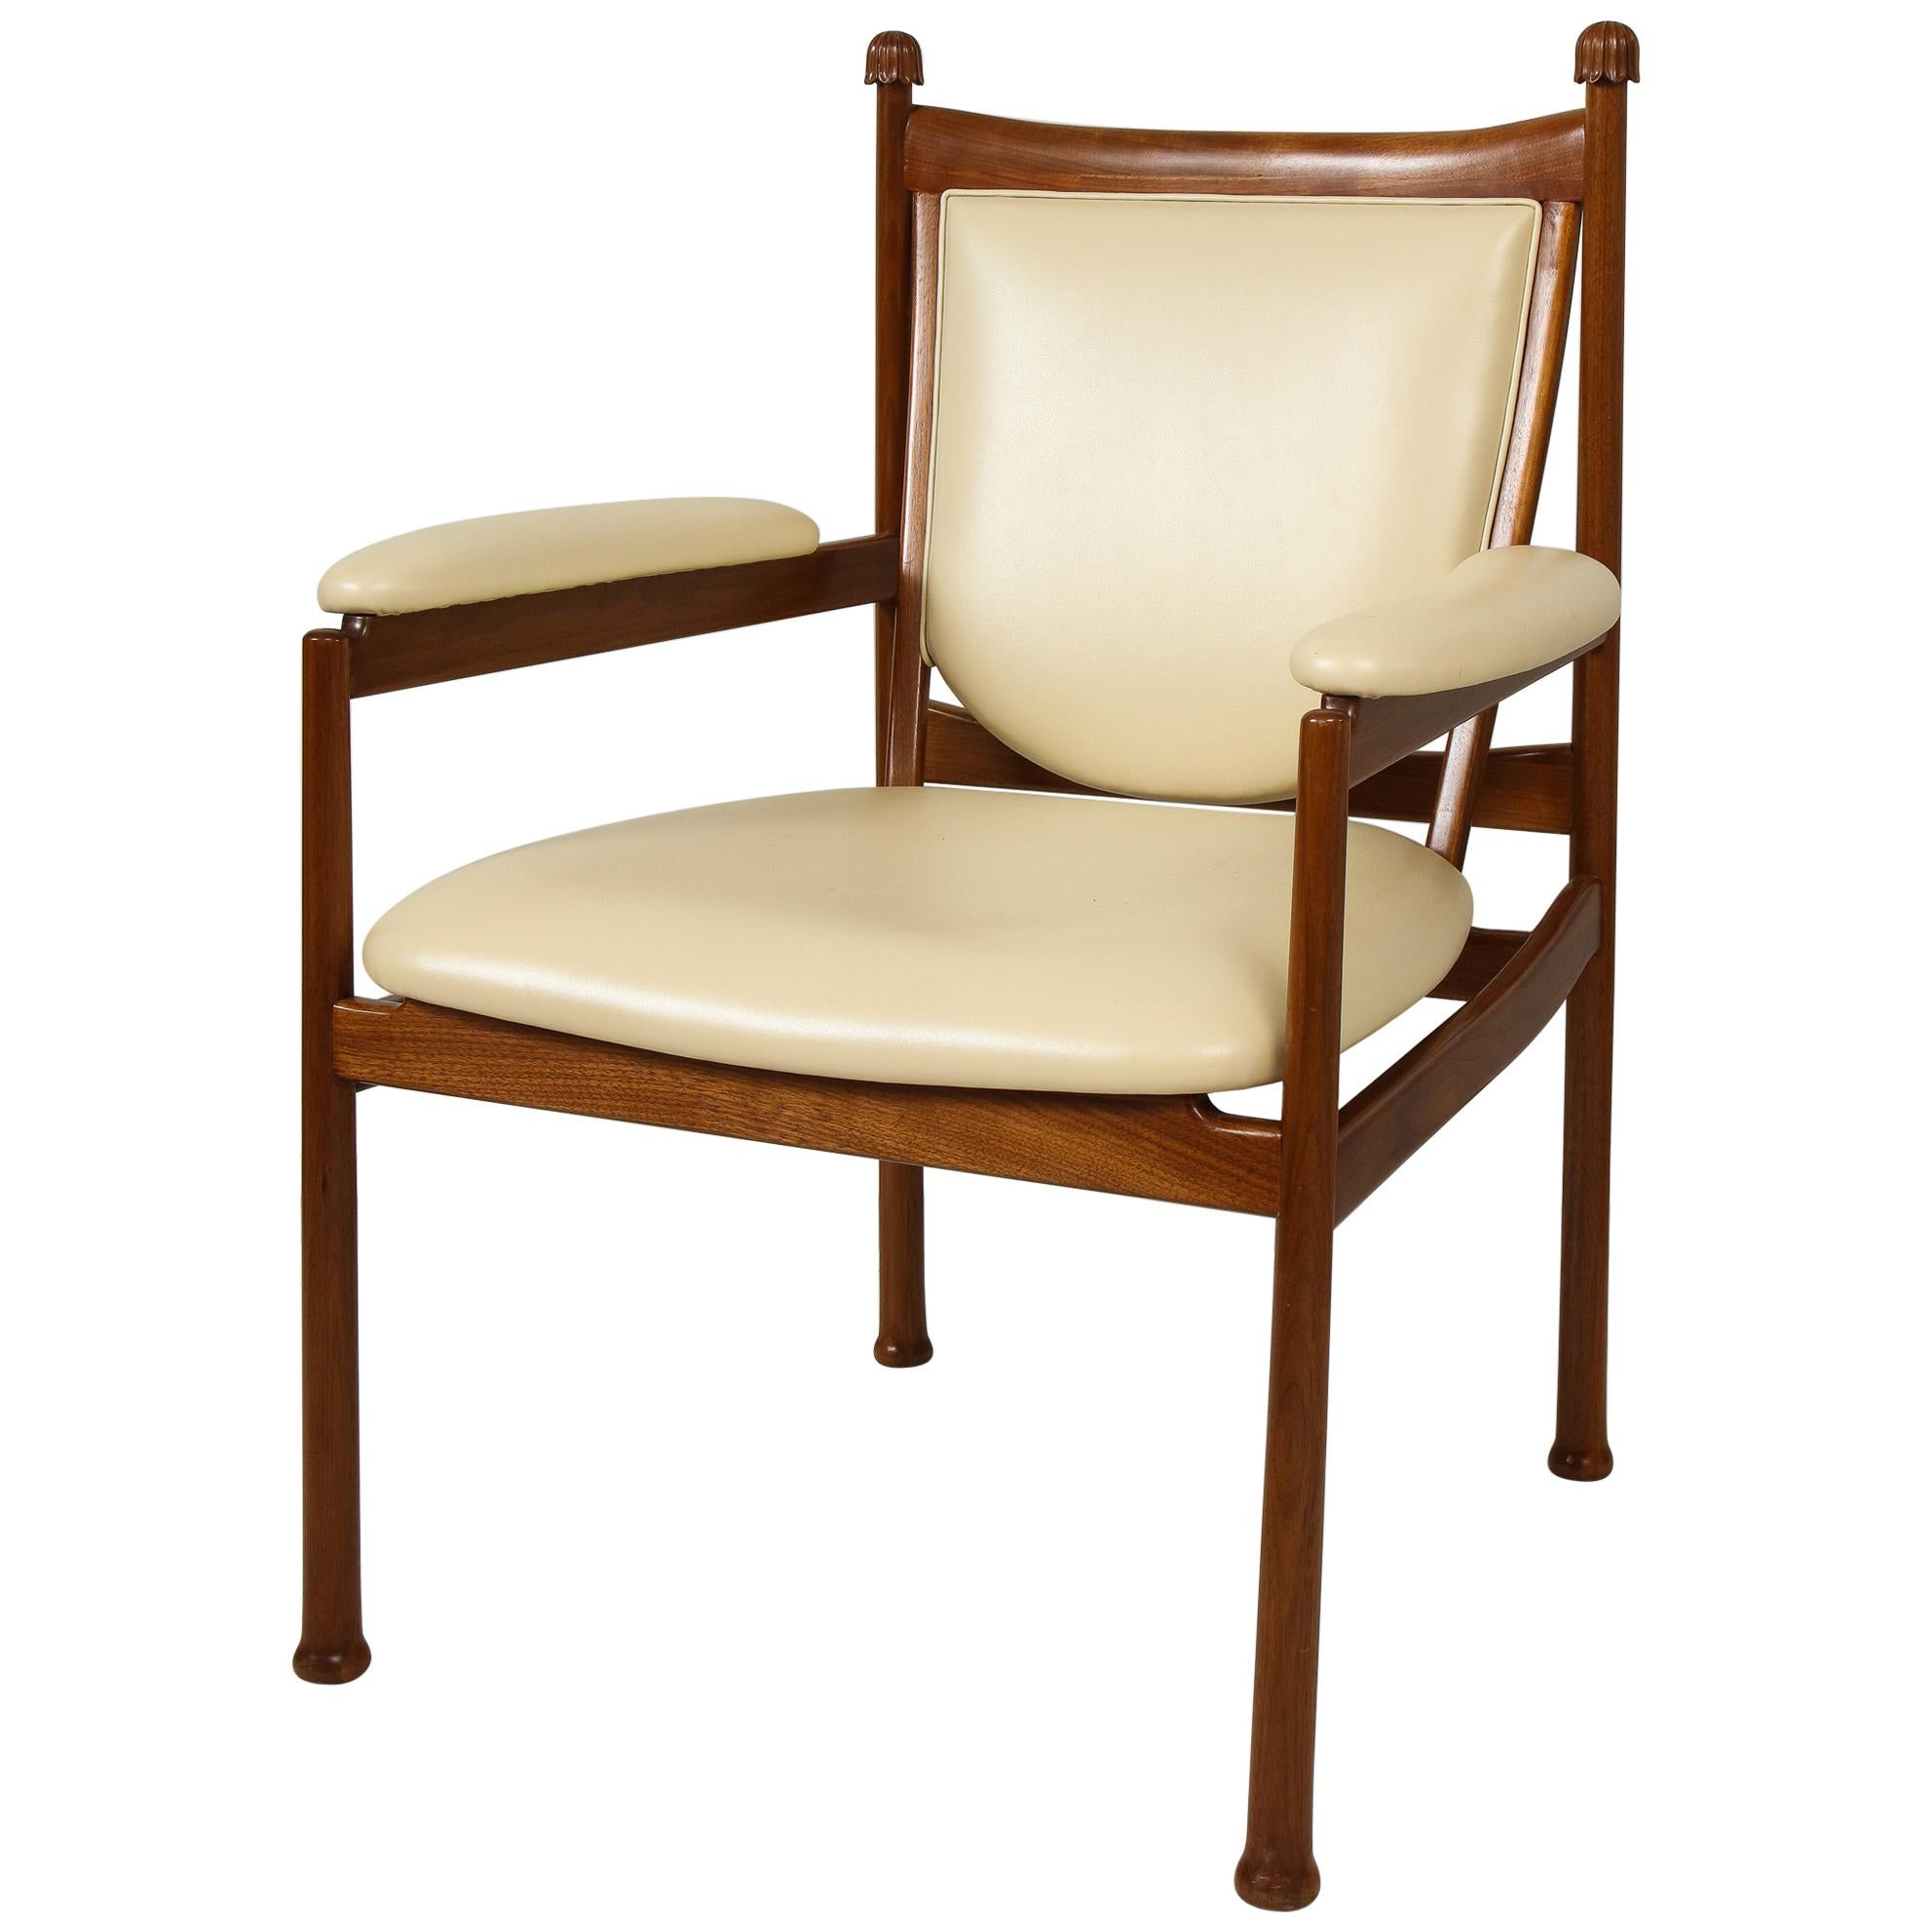 Custom Walnut Marion Armchair/ Lounge Chair Upholstered in Cream Leather